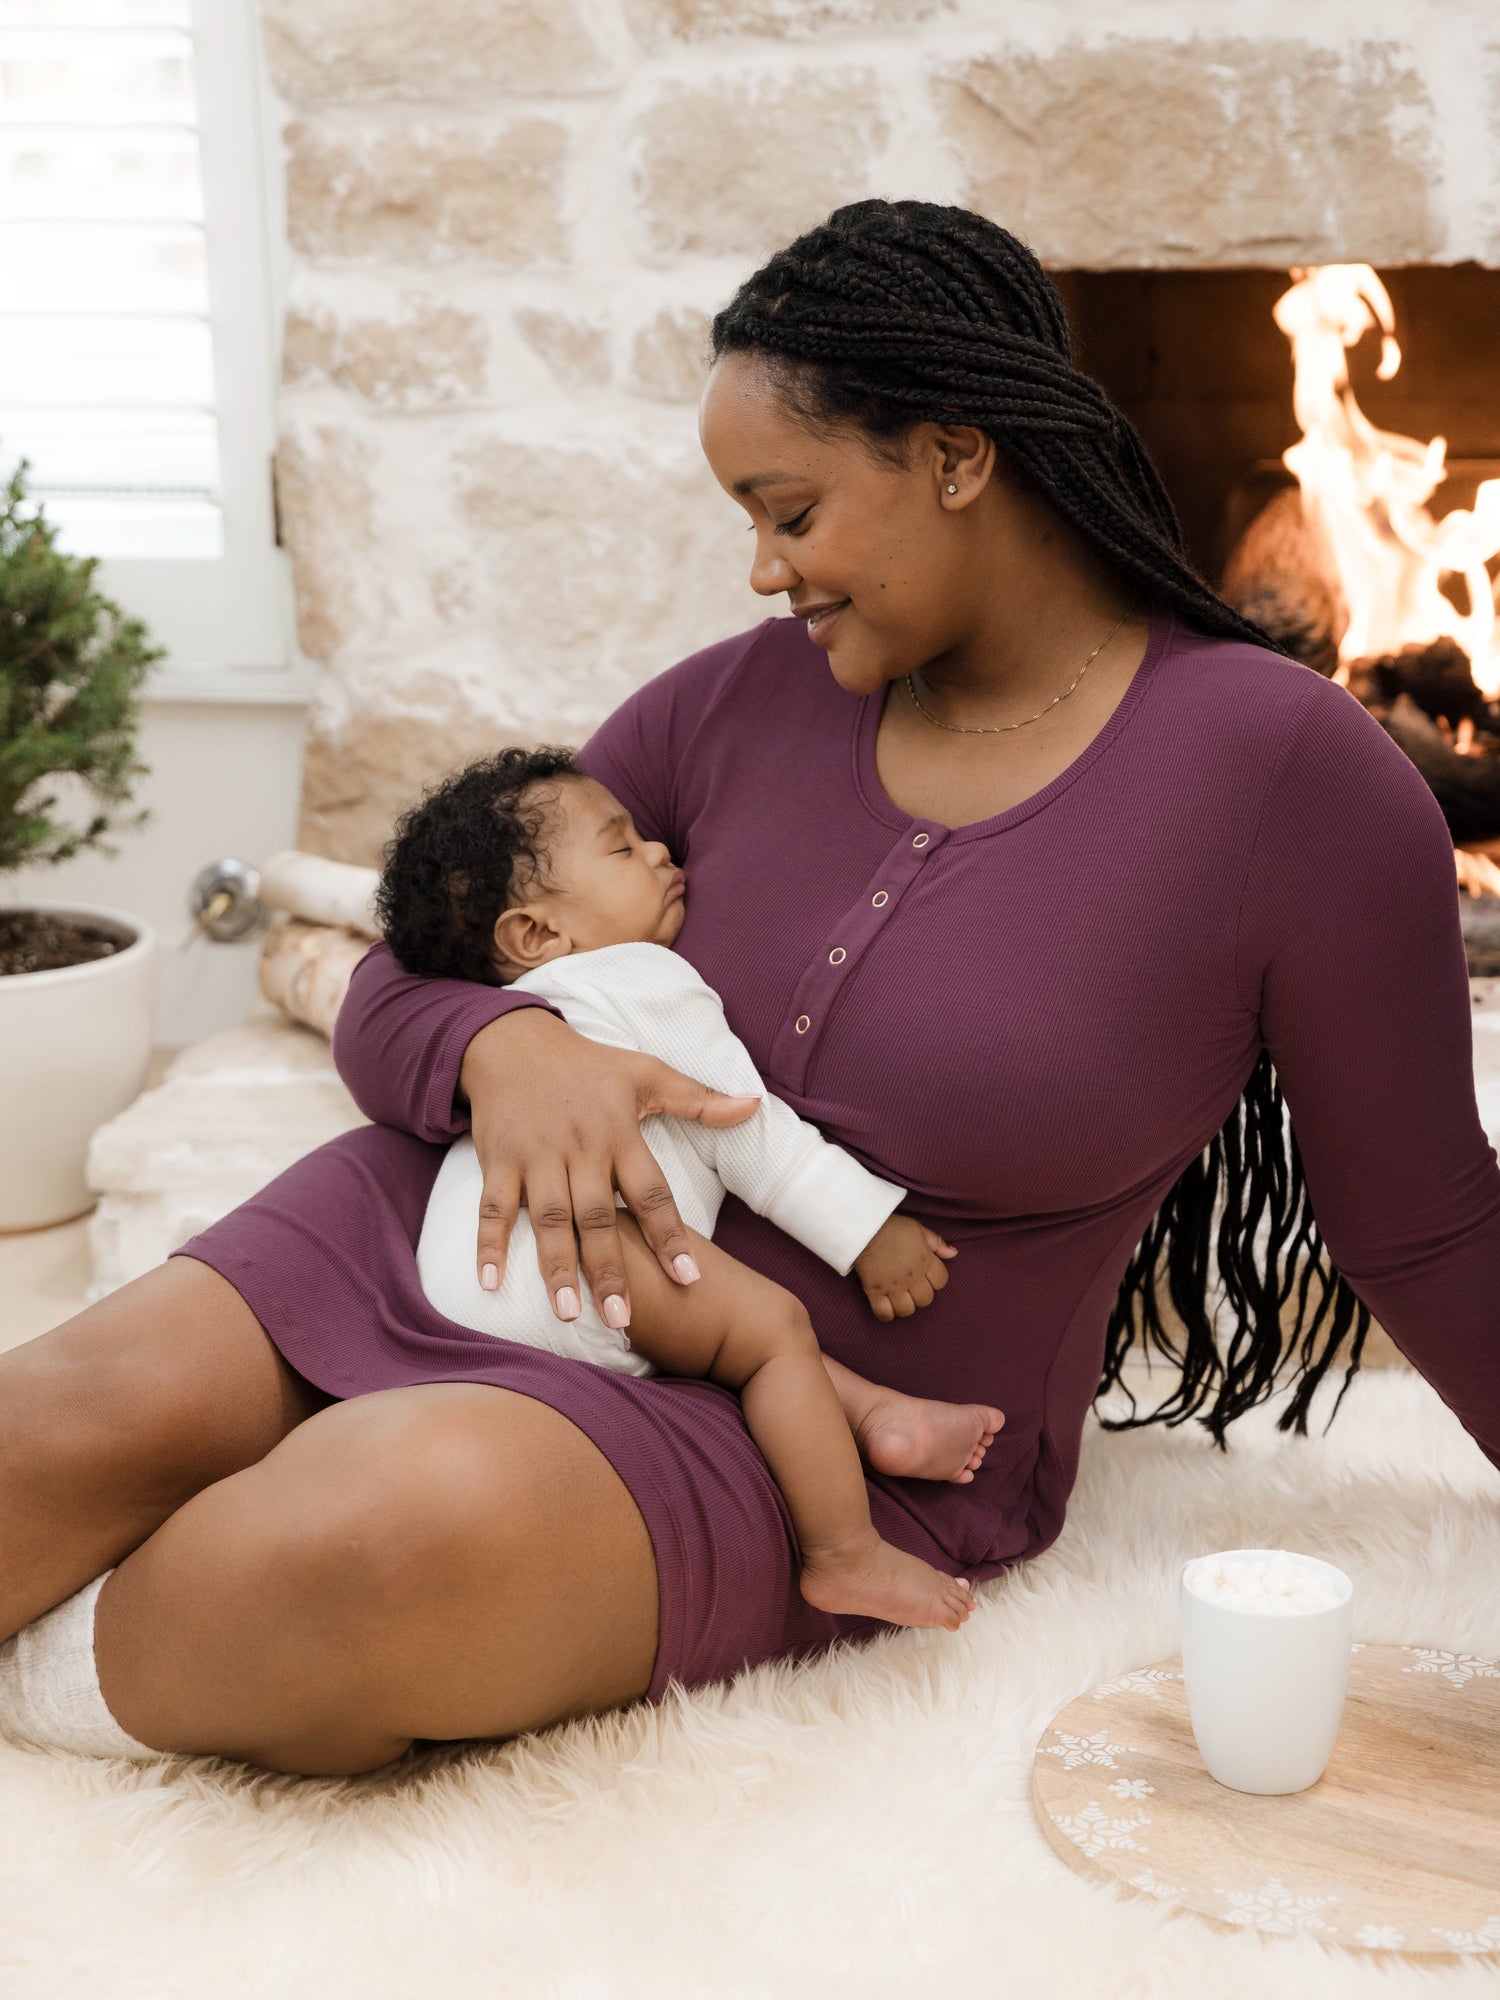 Model wearing the Betsy Ribbed Bamboo Maternity & Nursing Nightgown in Burgundy Plum holding her baby against her chest. @model_info:Roxanne is wearing a Large.